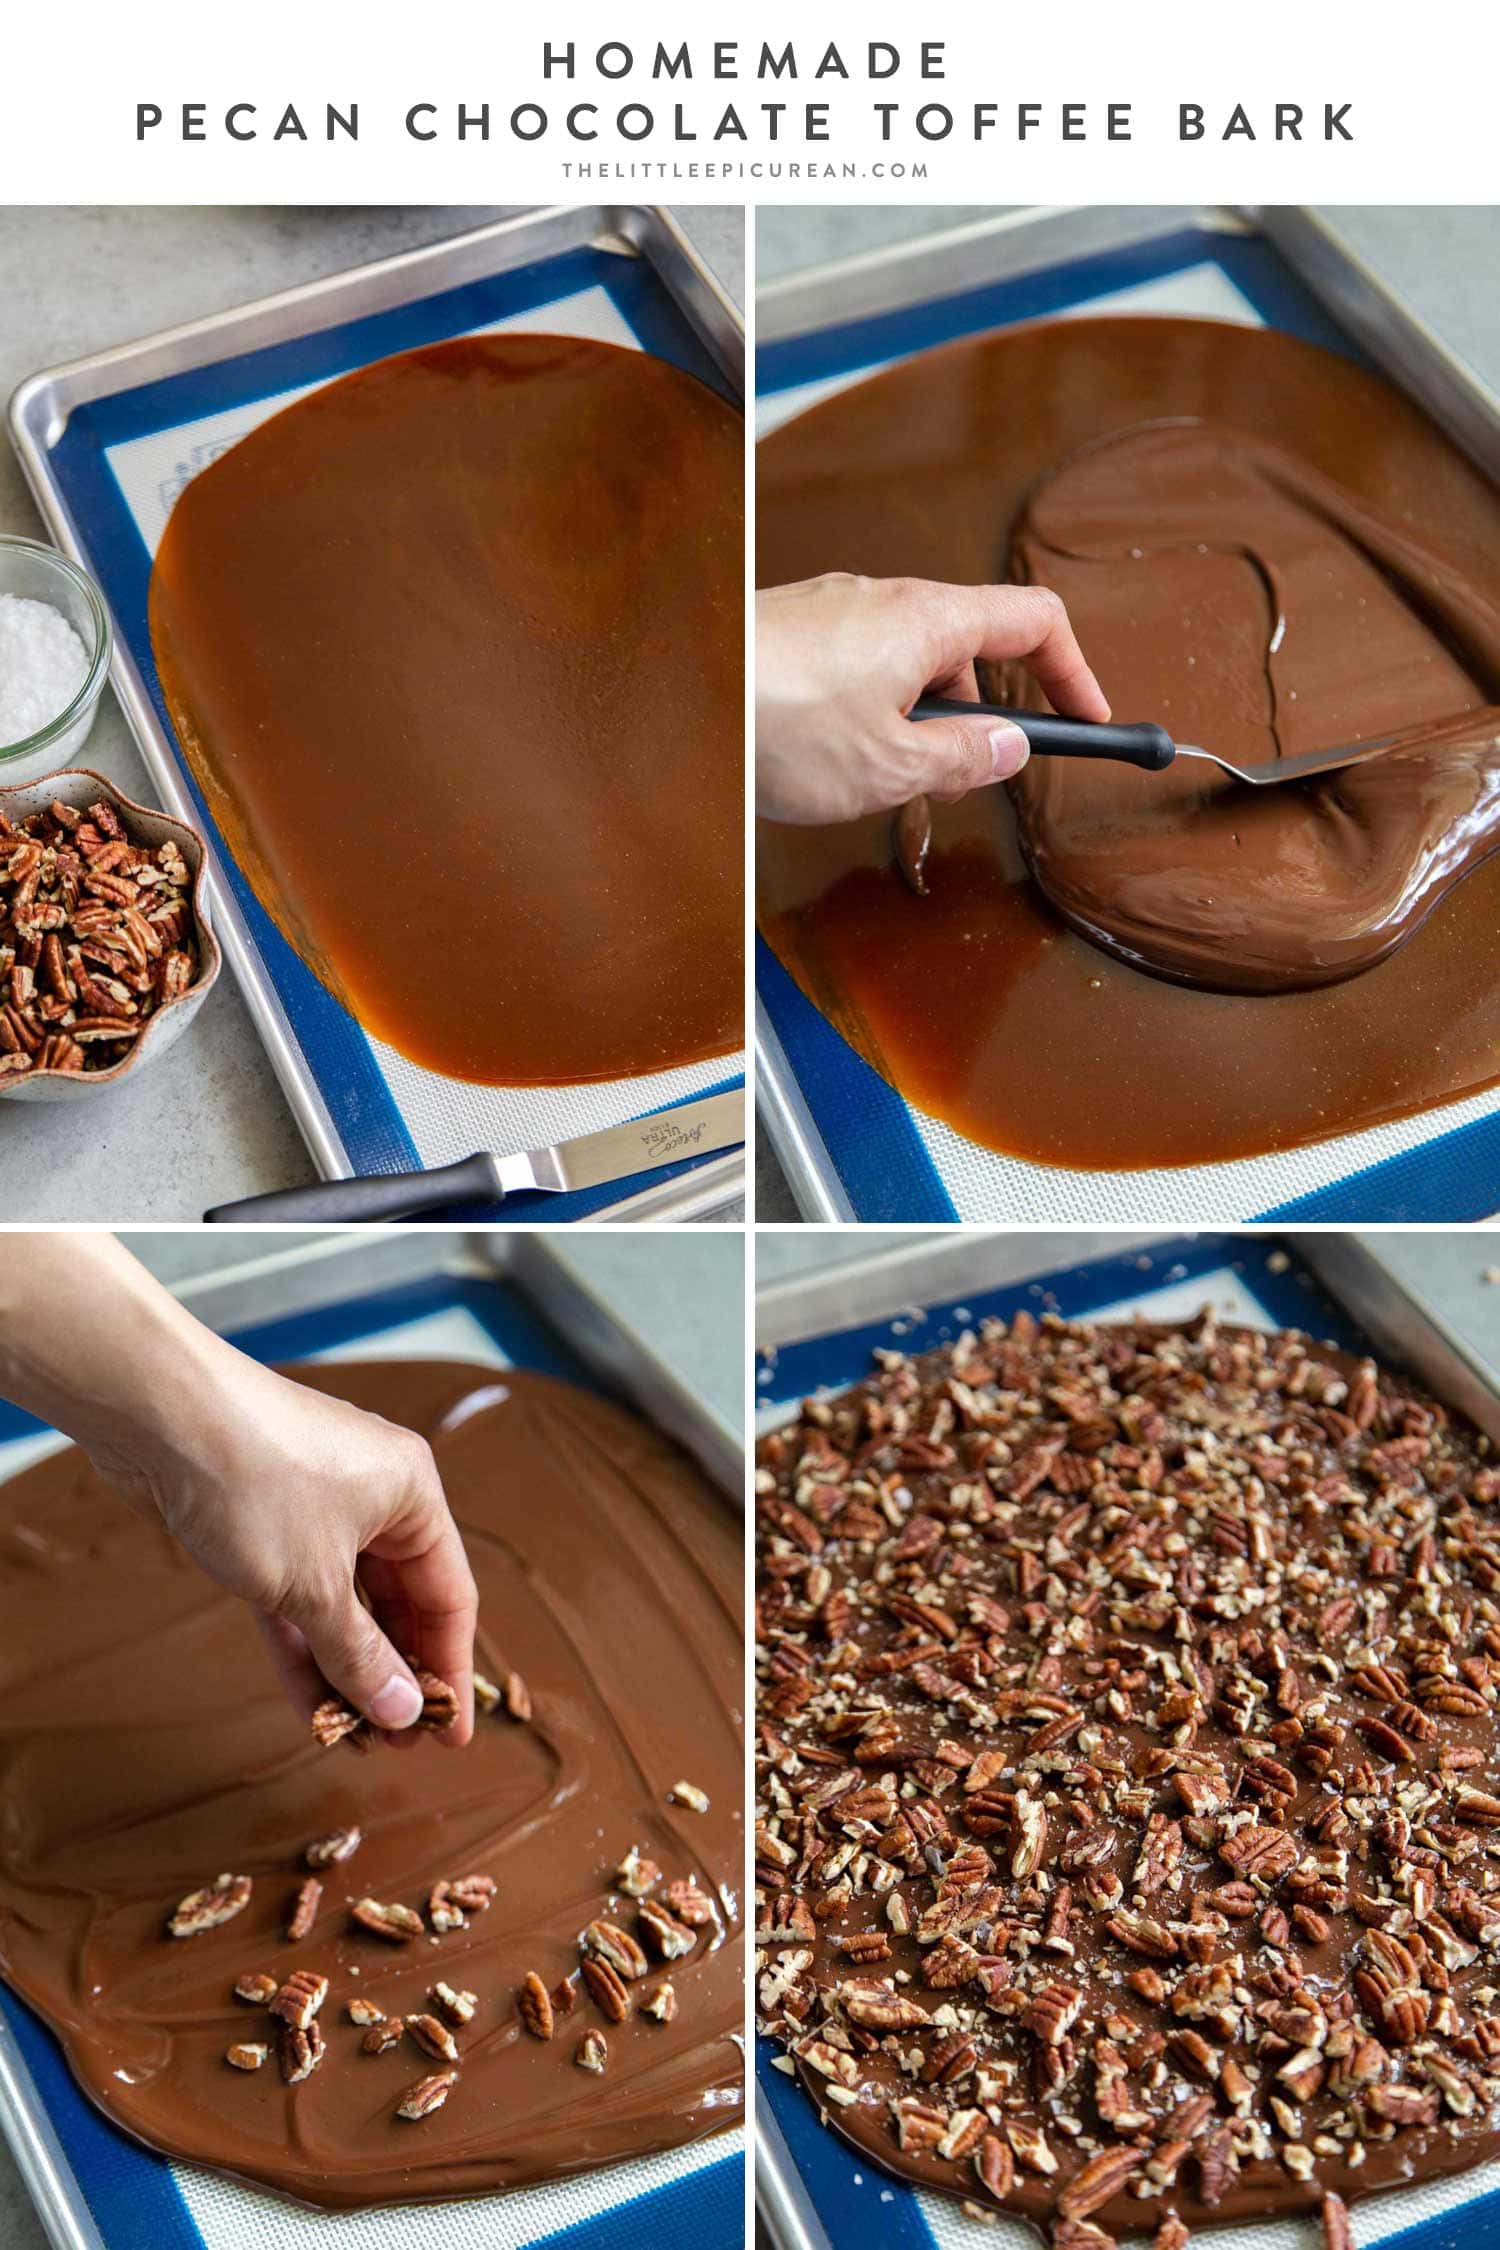 How to make Homemade Pecan Chocolate Toffee Bark. Use this easy recipe to make holiday gifts for family and friends. #chocolate #candymaking #homemadetoffee #toffee